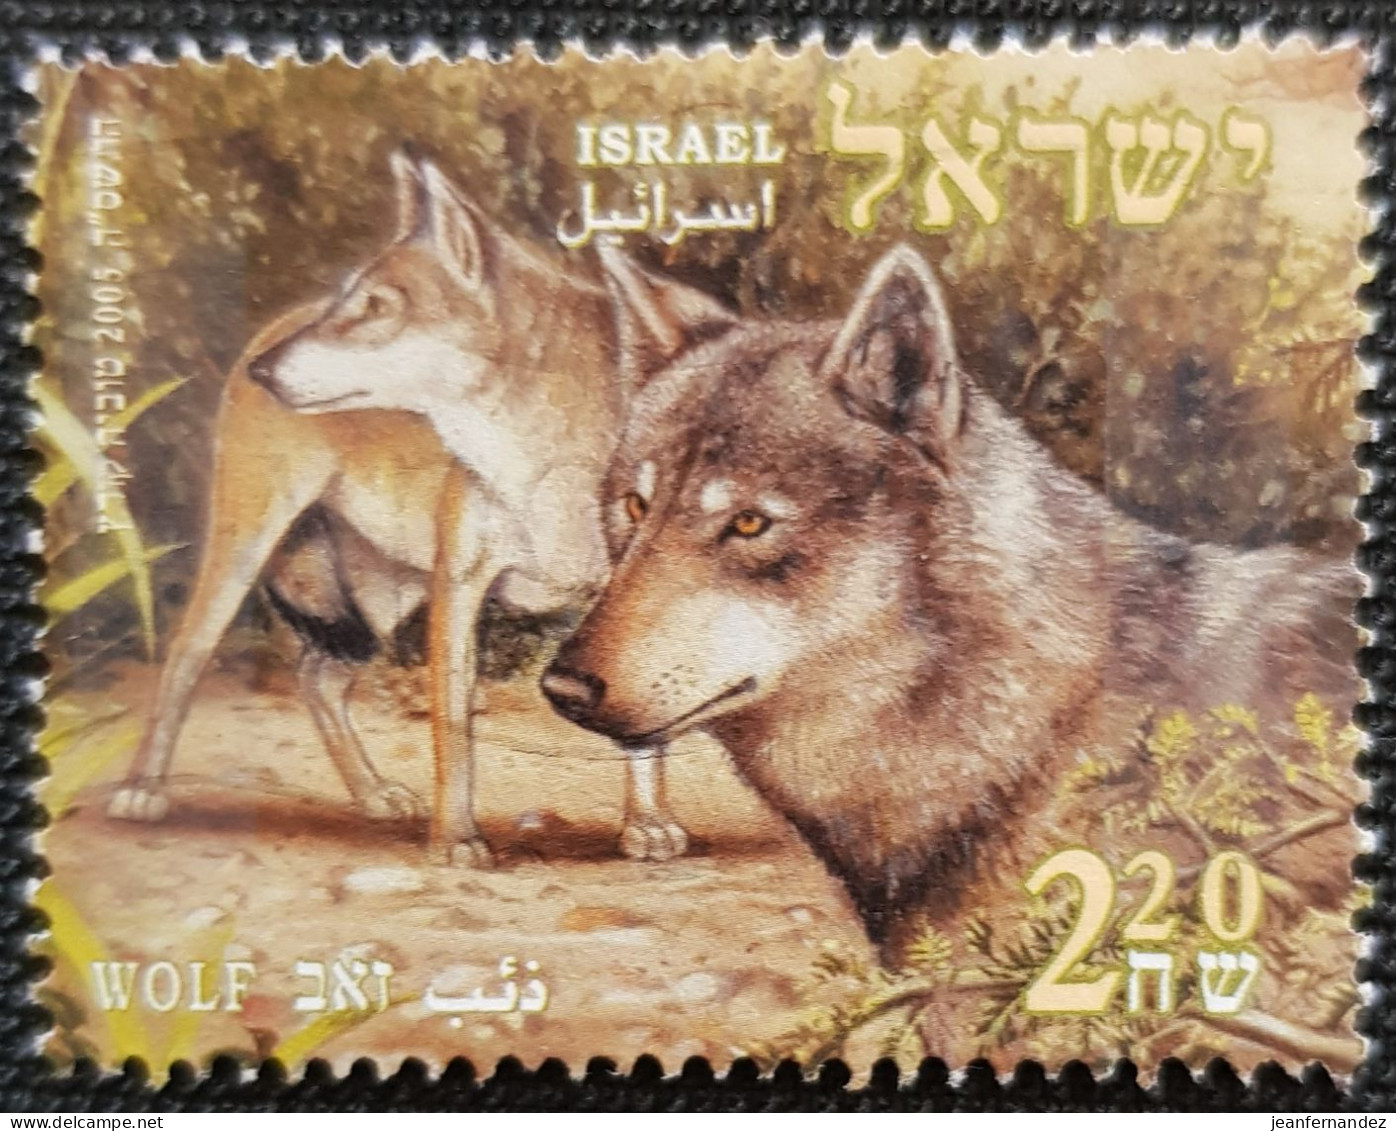 Israel 2005 Biblical Animal Stampworld N° 1805 - Used Stamps (without Tabs)